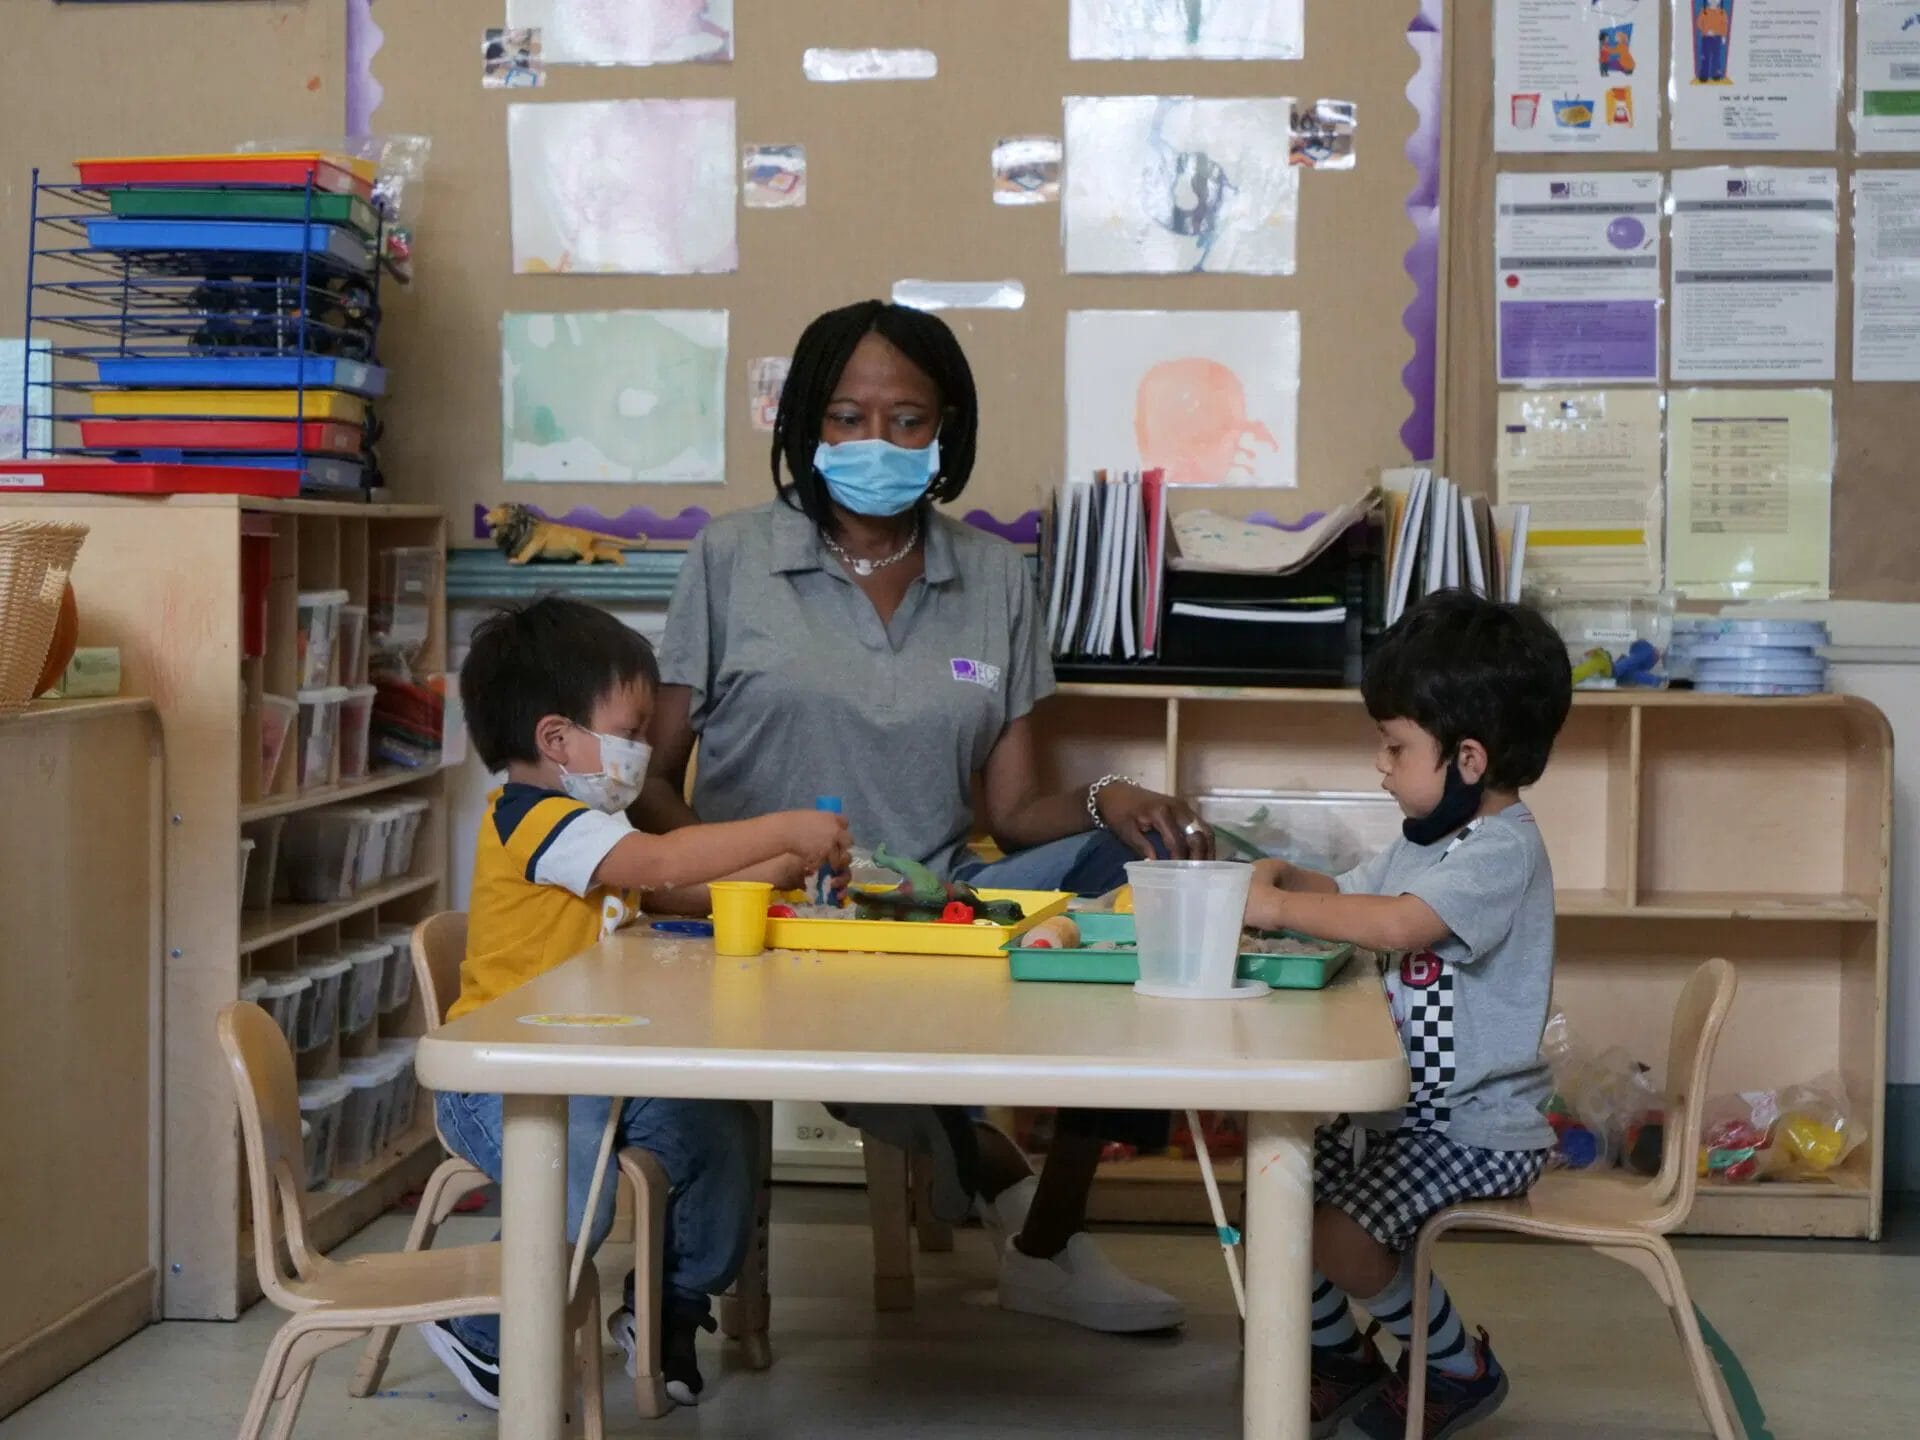 A Black woman wearing a surgical mask sits playing with two very young children playing with dinosaur toys and sand at a children's table in a classroom.